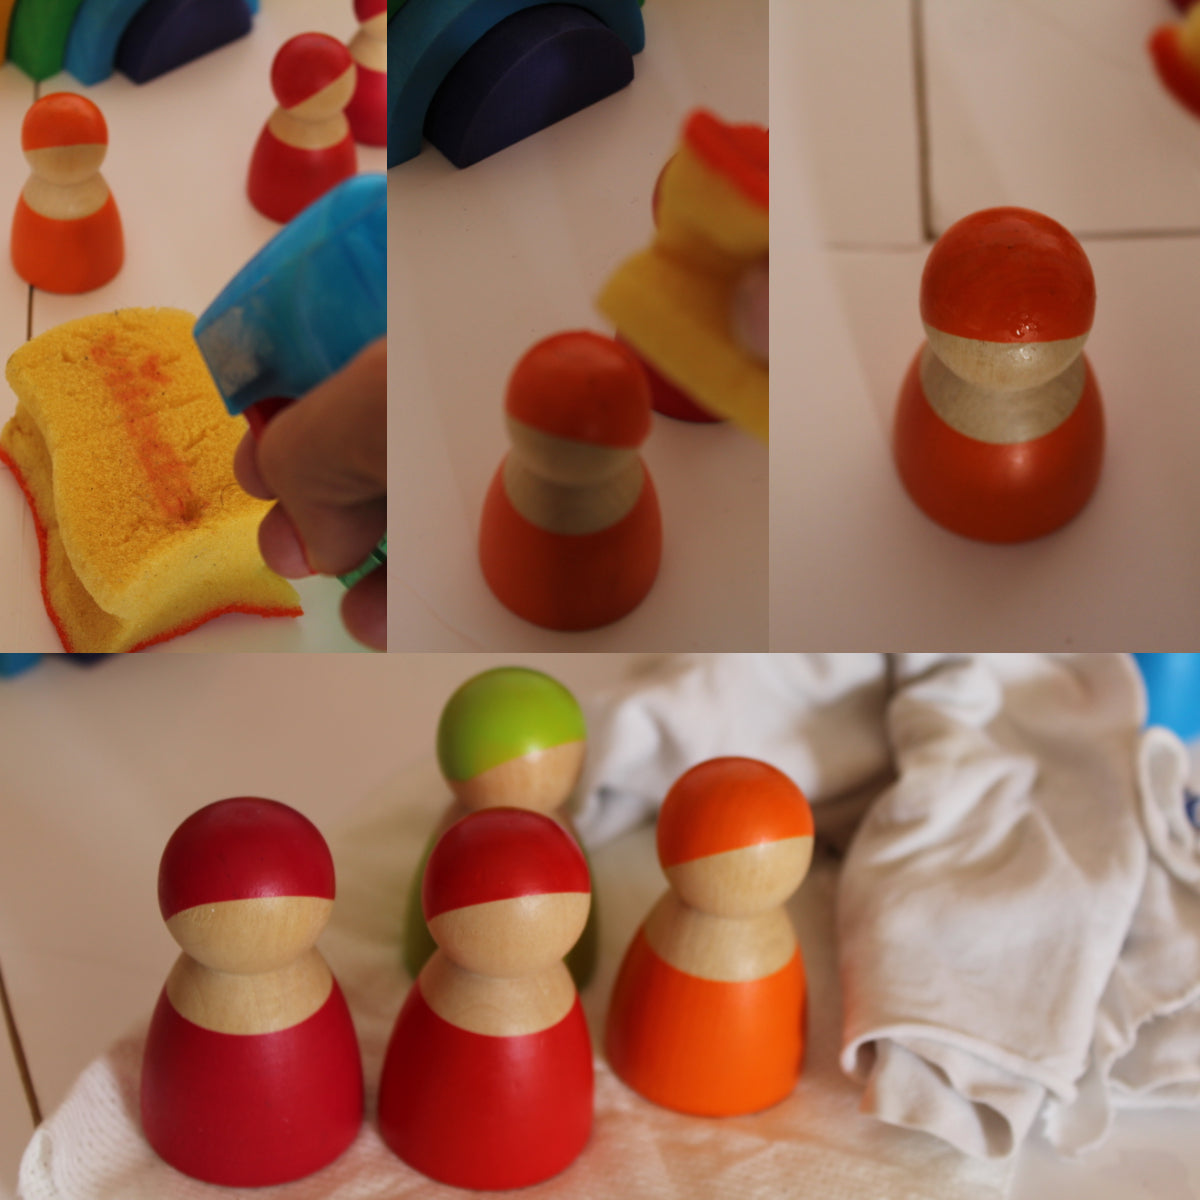 Wooden toys disinfection process